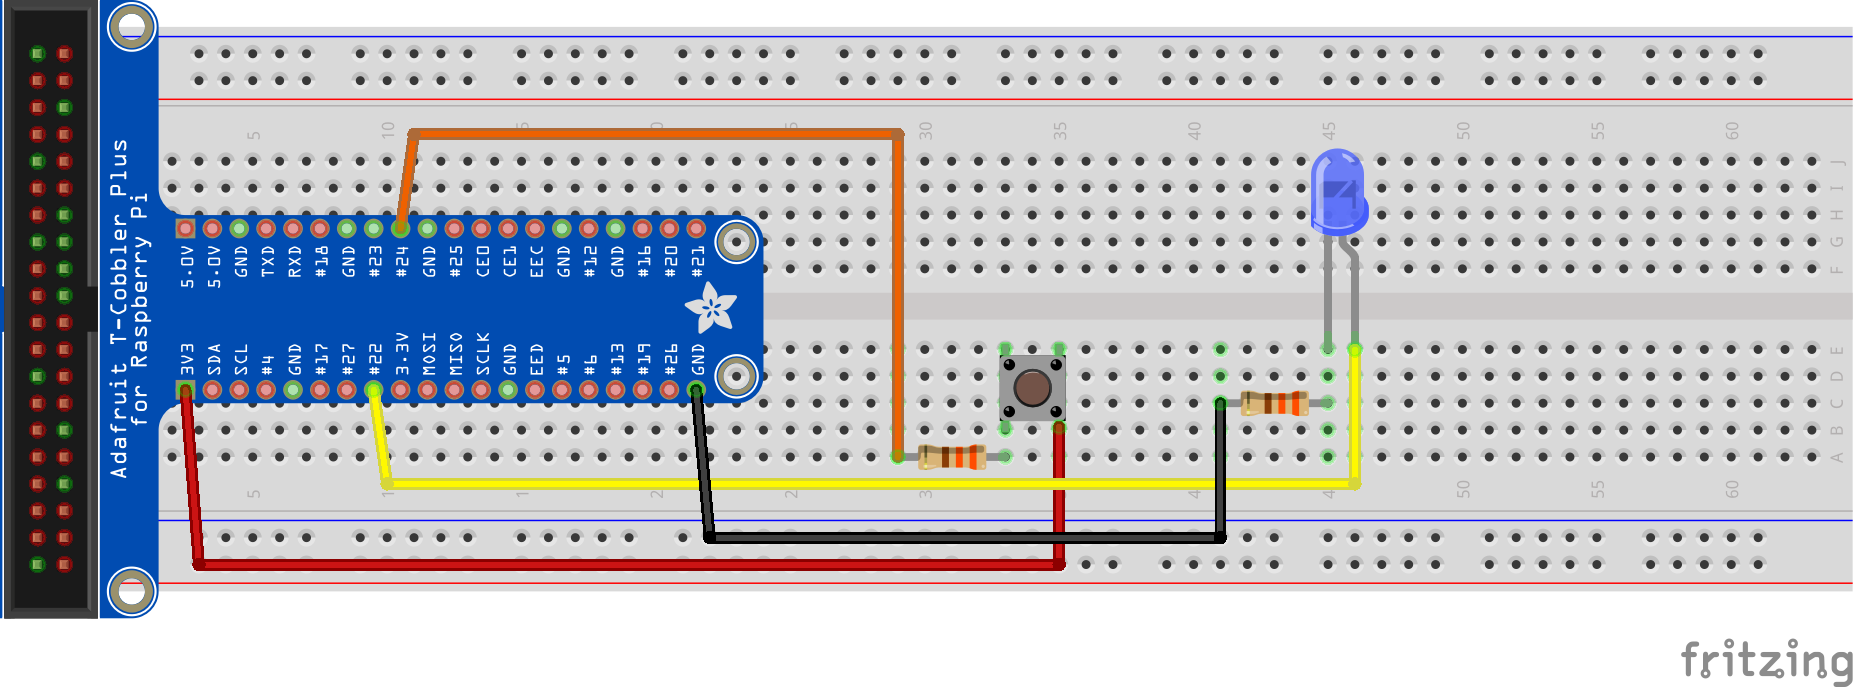 Wiring of a LED and button for the minimal example application